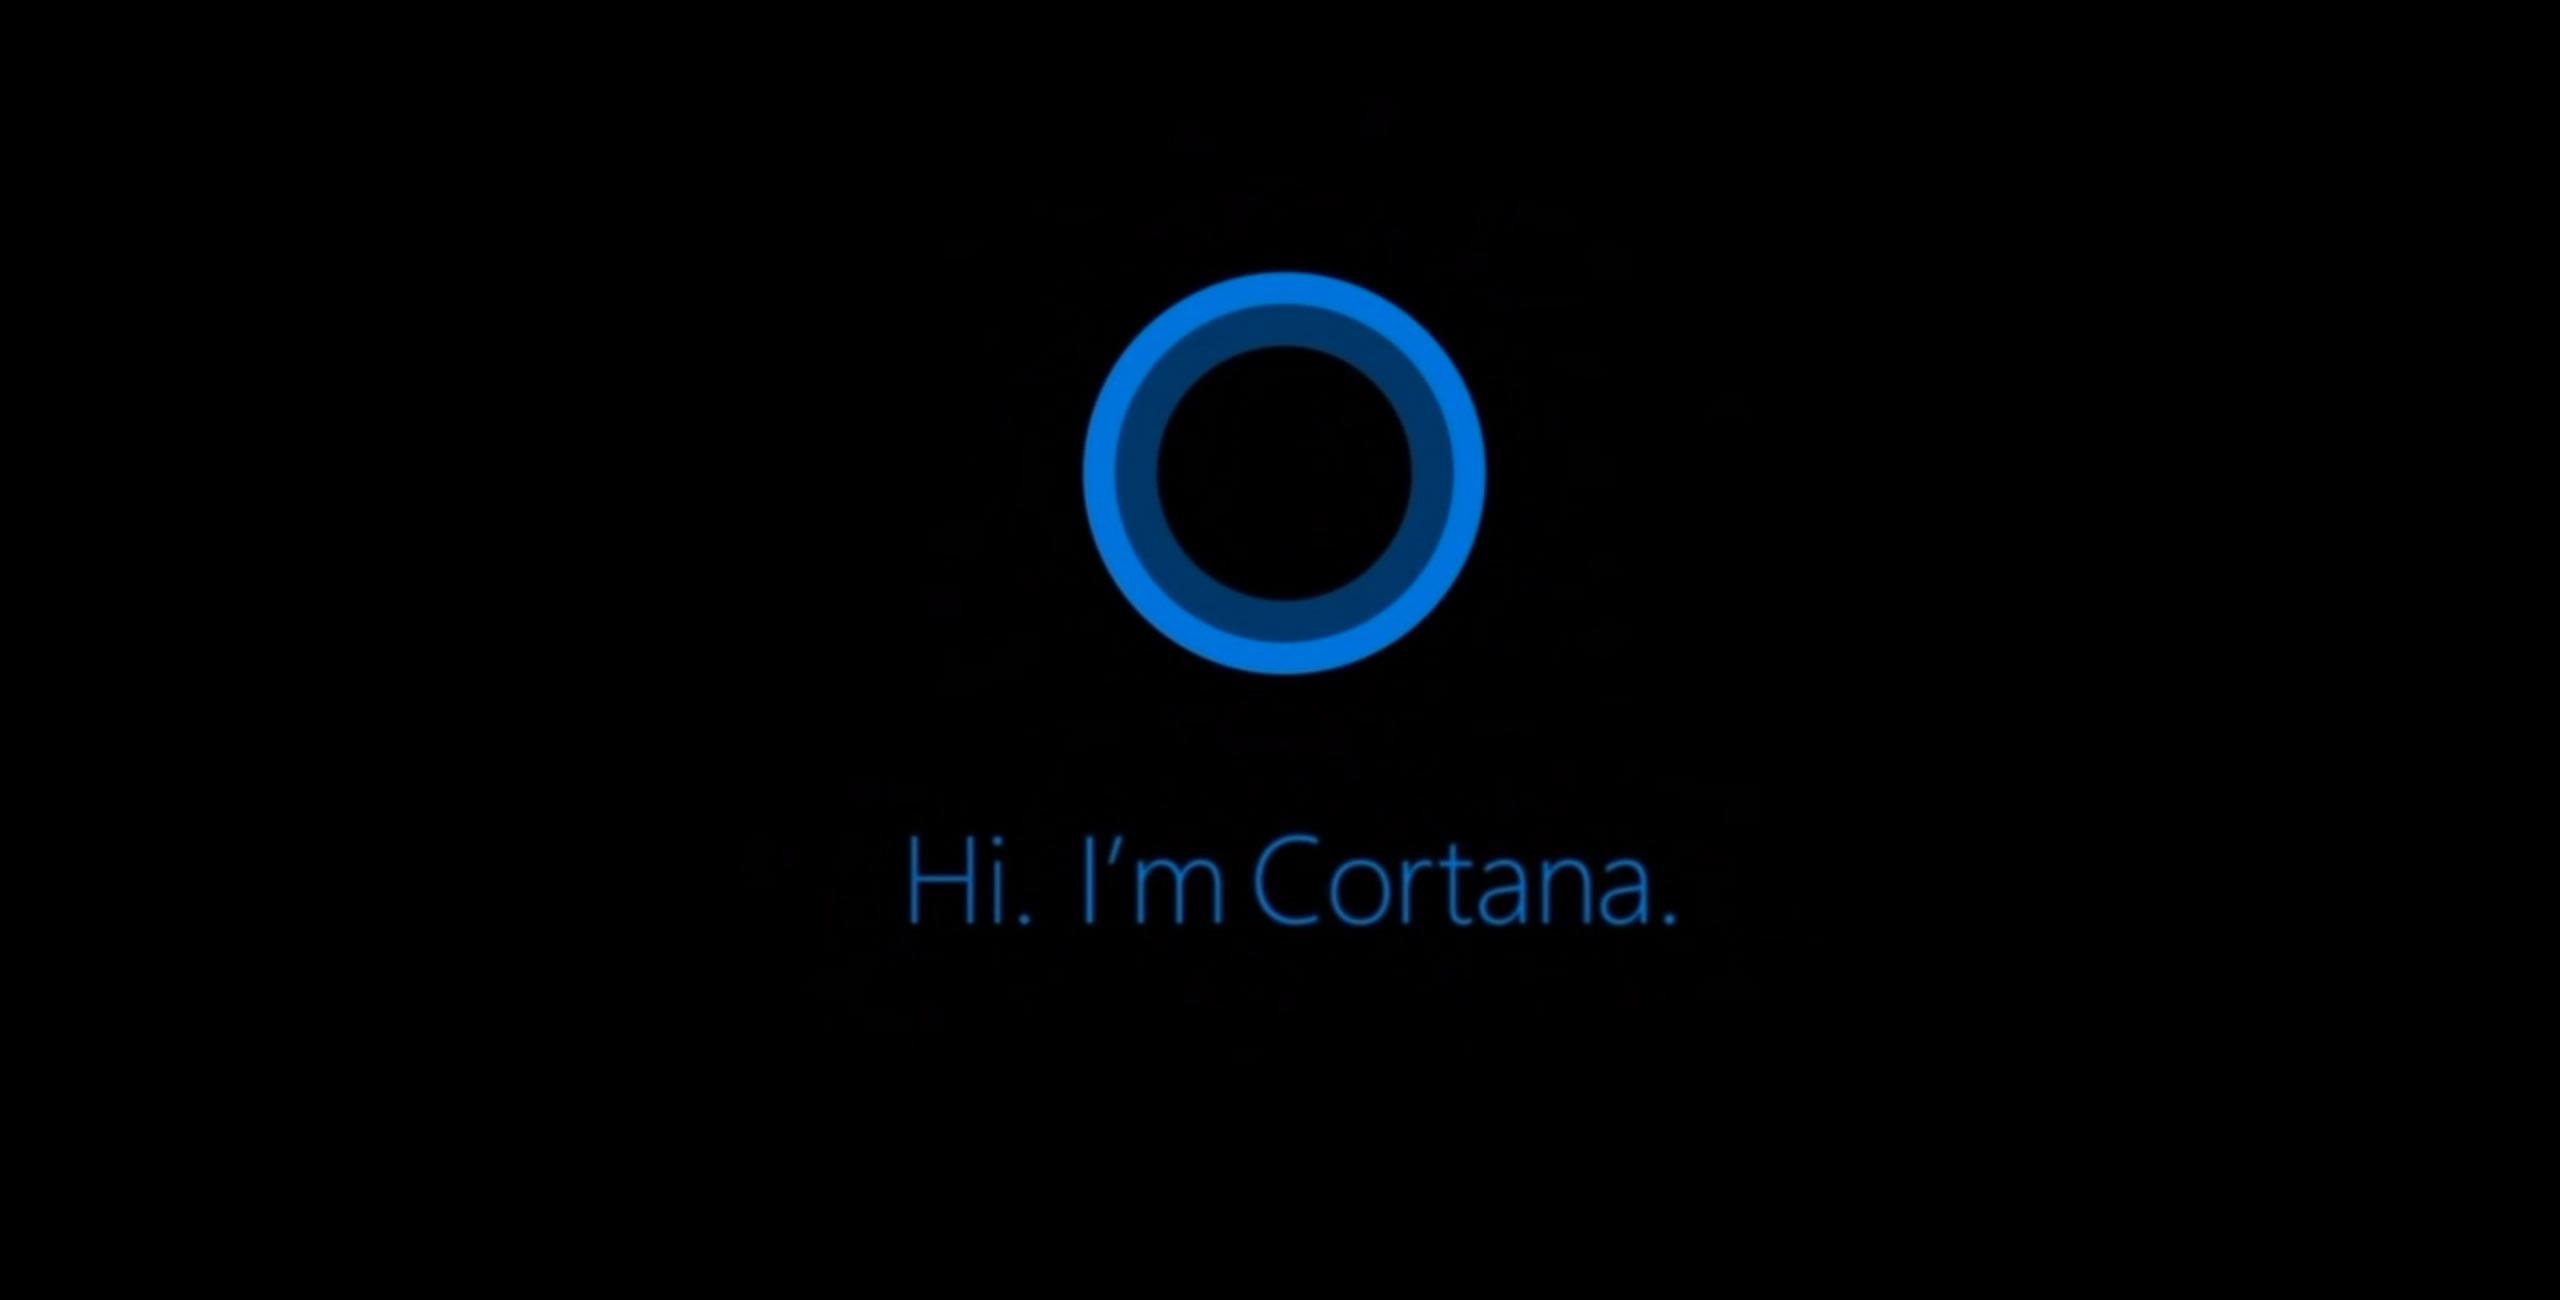 Apple S Siri With Cortana For Windows Phone Along Other Goodies